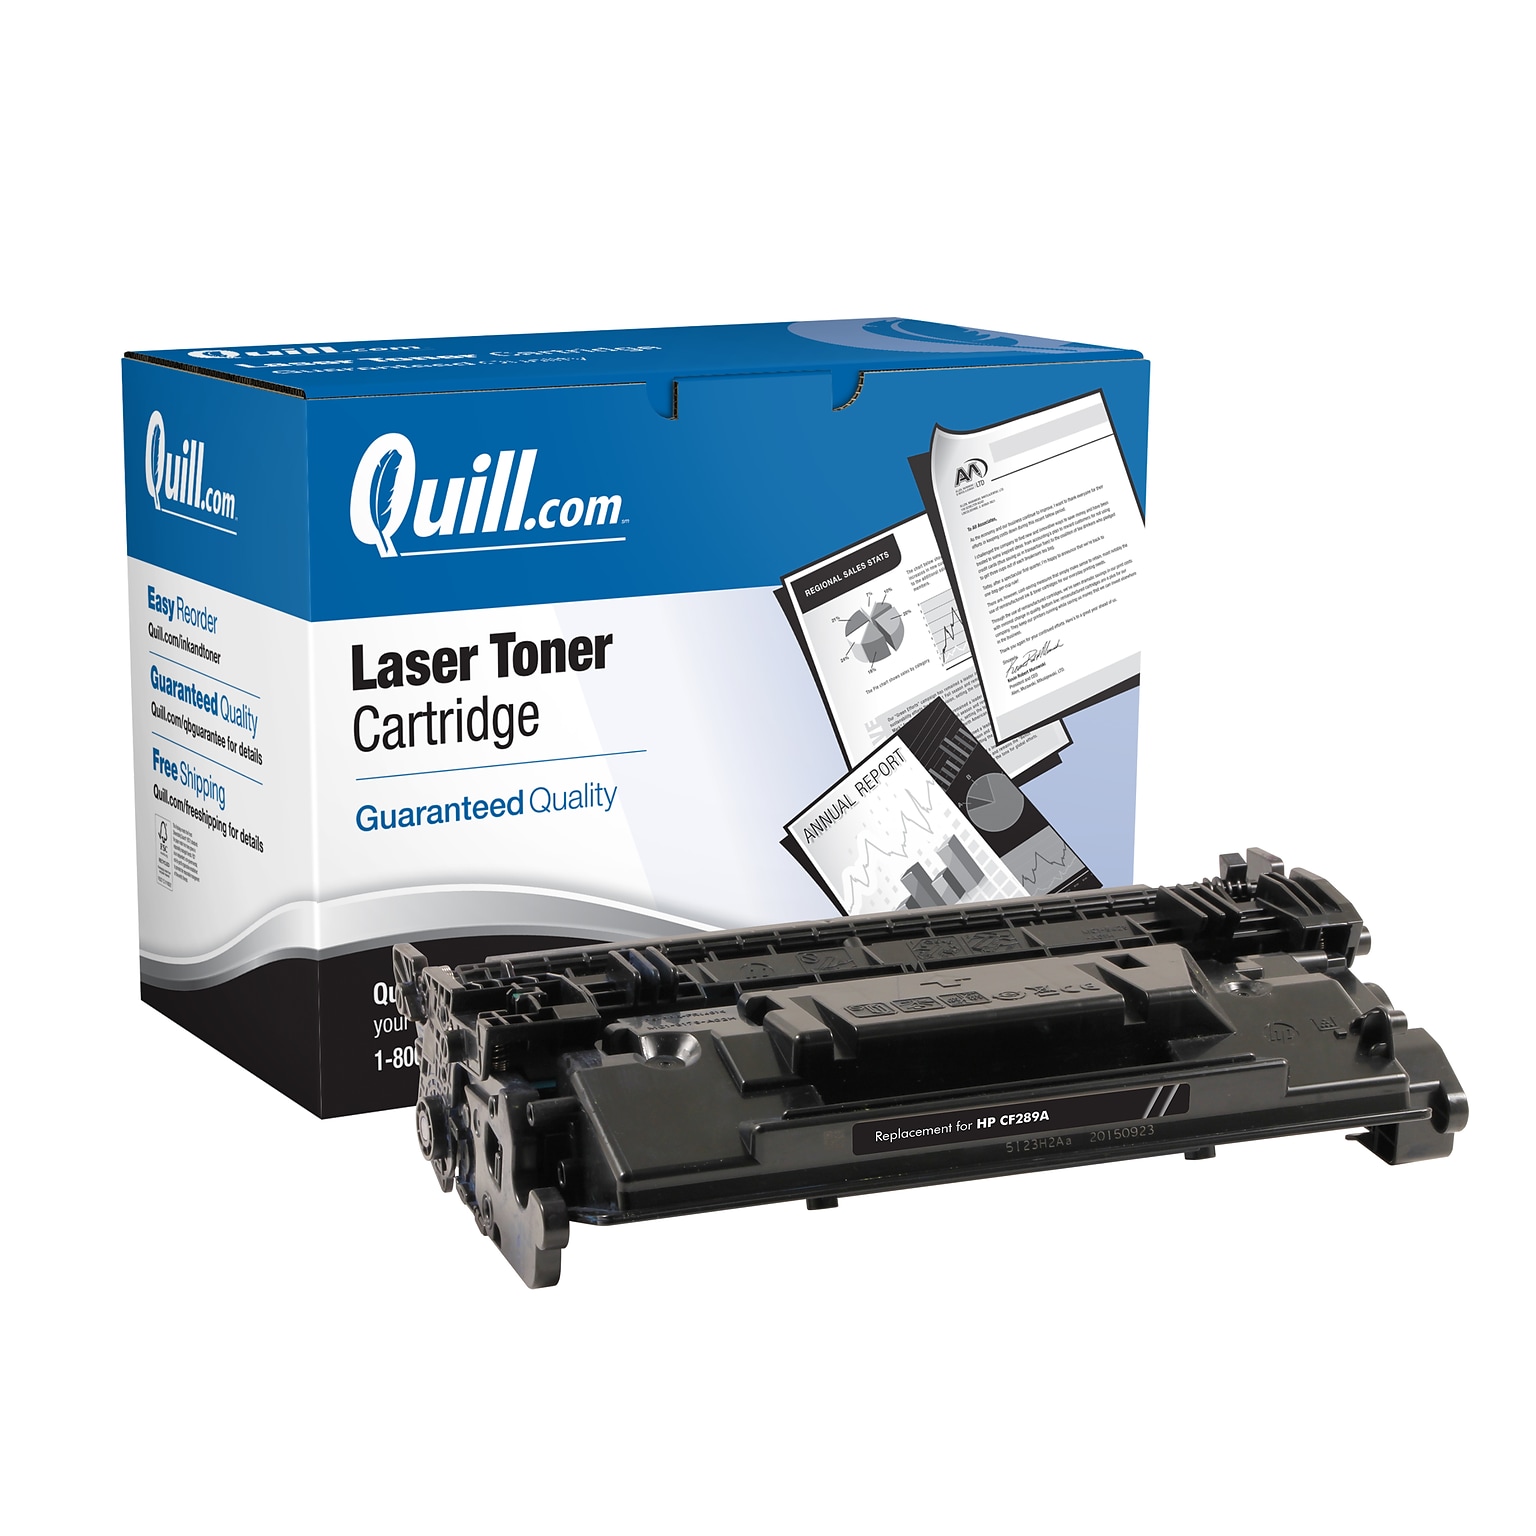 Quill Brand® Remanufactured Black Standard Yield Toner Cartridge Replacement for HP 89A (CF289A) (Lifetime Warranty)